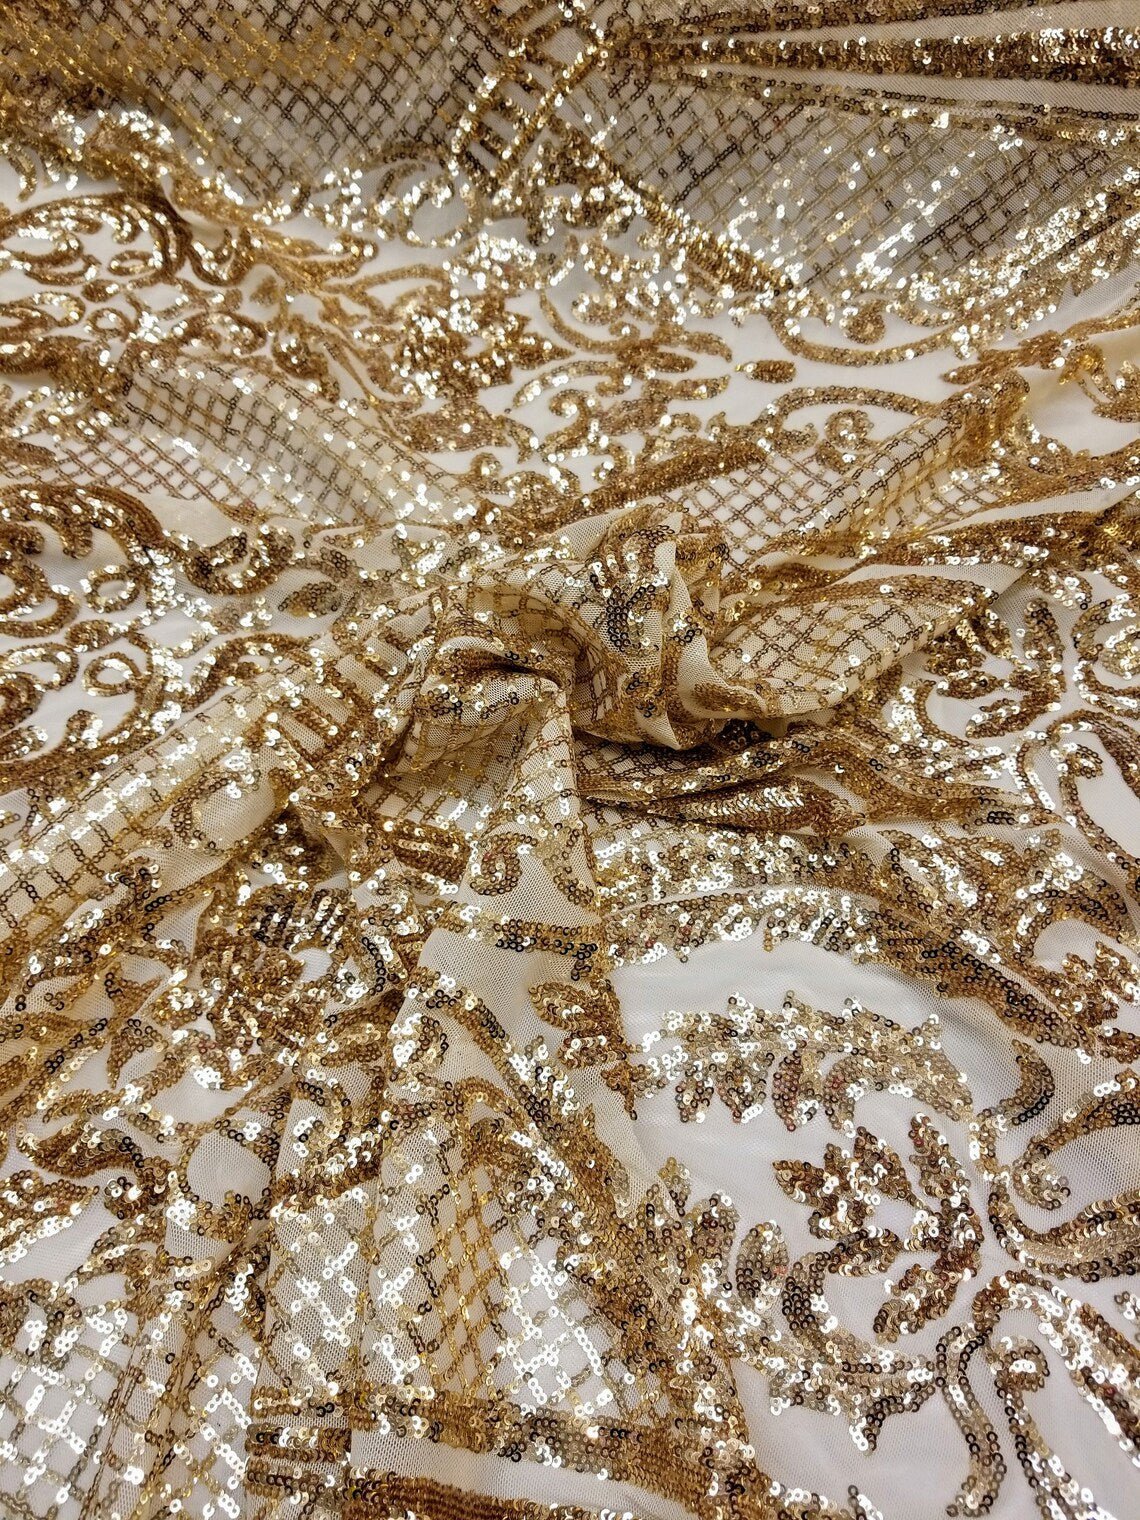 Gold sequin Fabric on Champagne Gold stretch fabricGold Sequin FabricICE FABRICSICE FABRICSBy The YardGold sequin Fabric on Champagne Gold stretch fabric ICE FABRICS